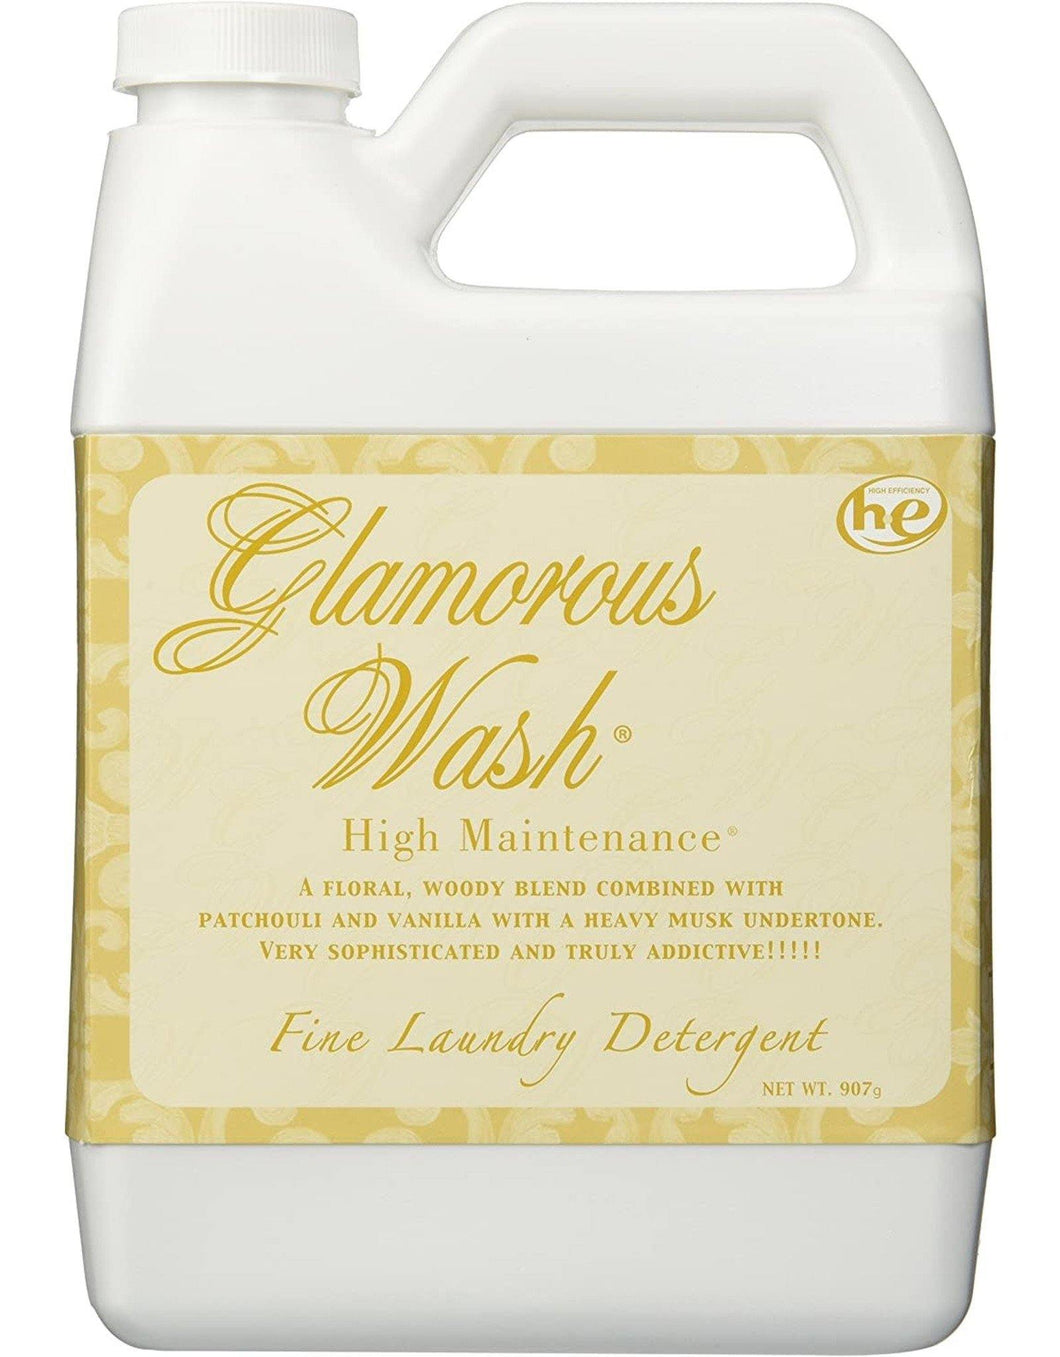 907g/32 oz. Glamorous Laundry Detergent - Red Tulip Gifts